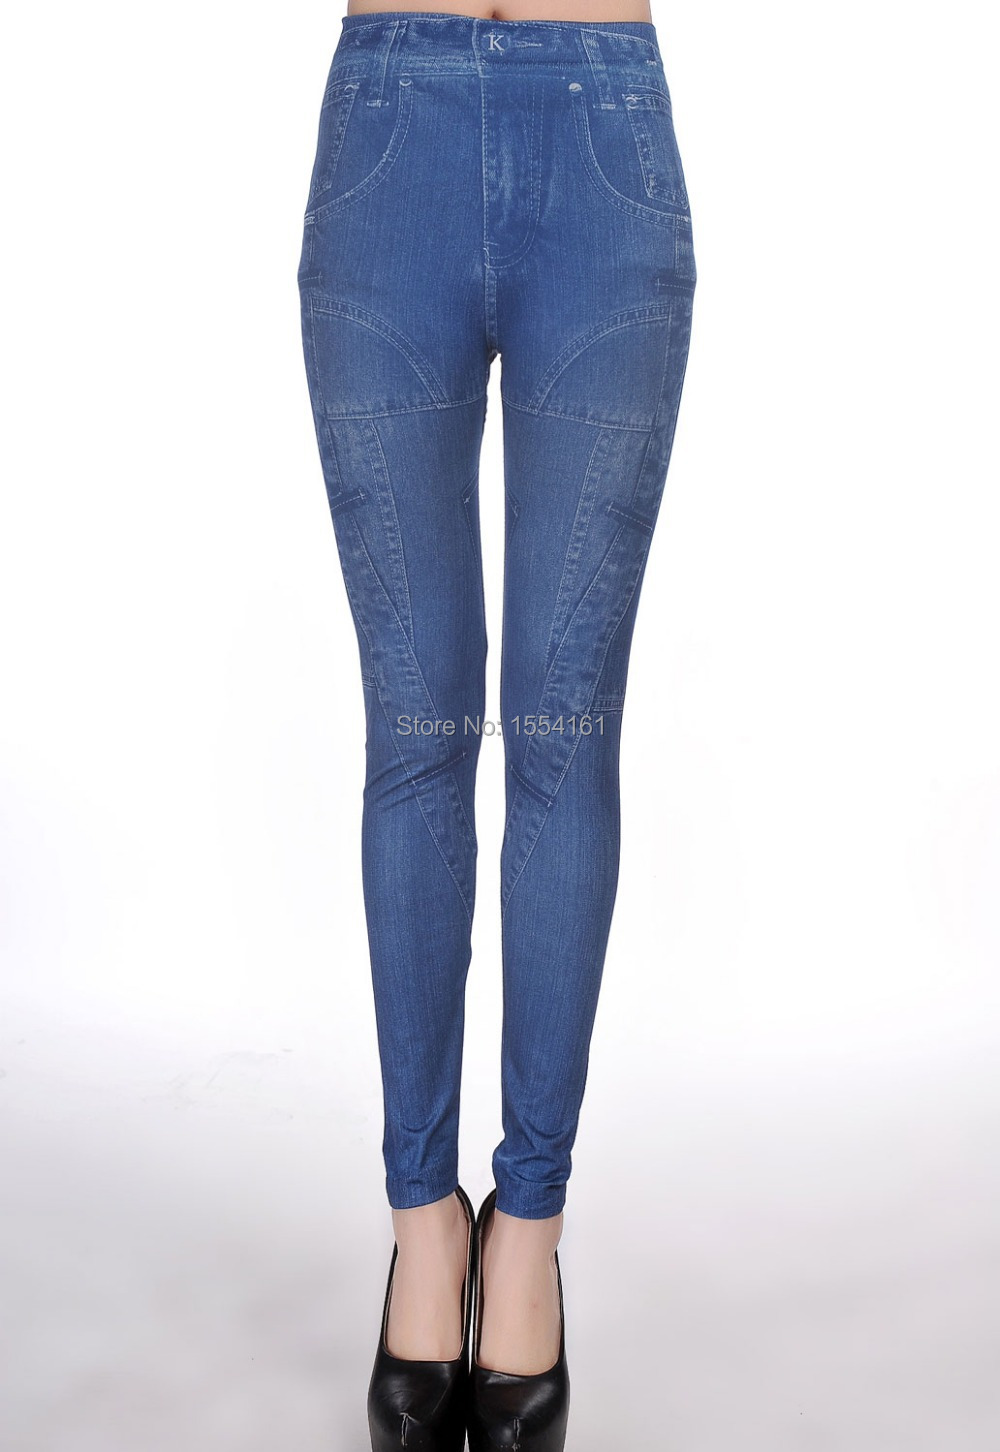    jeggings lc79319